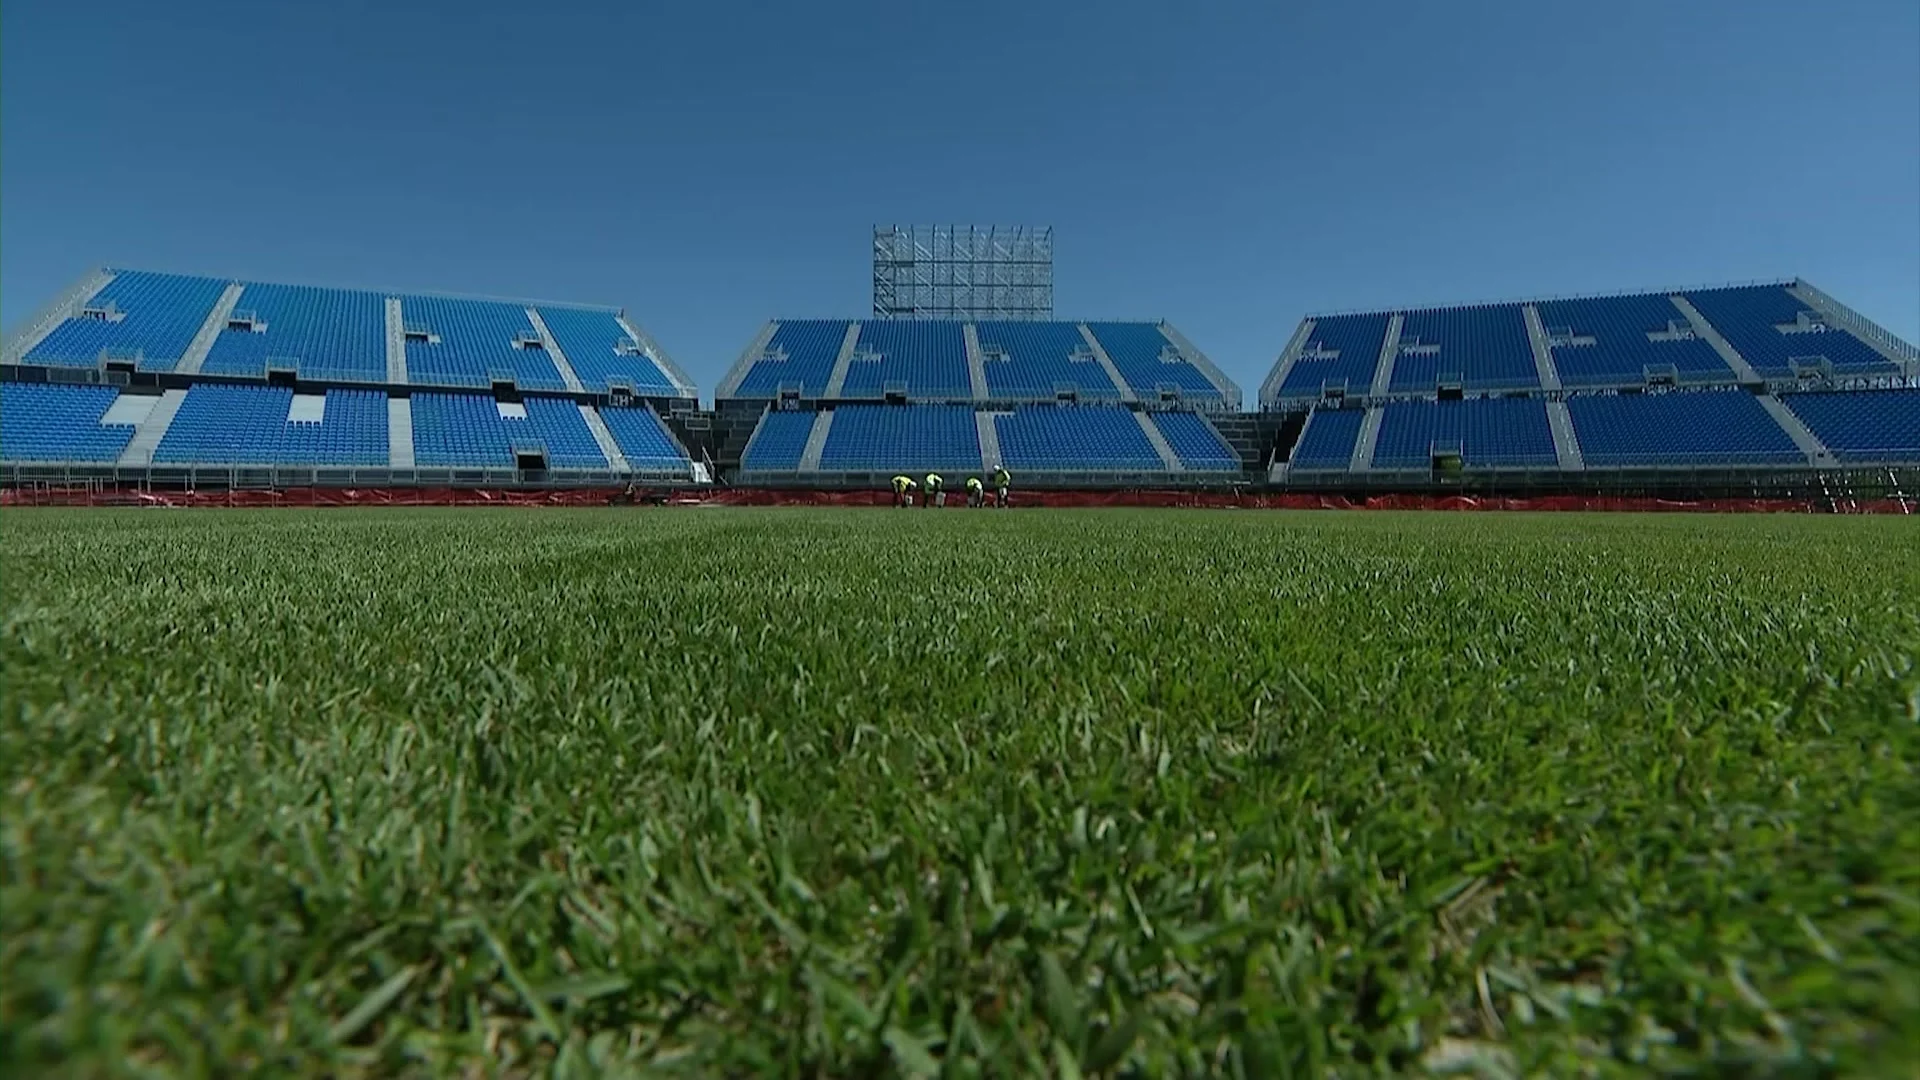 Get an inside look at the field and stadium constructed for the Cricket World Cup at Eisenhower Park